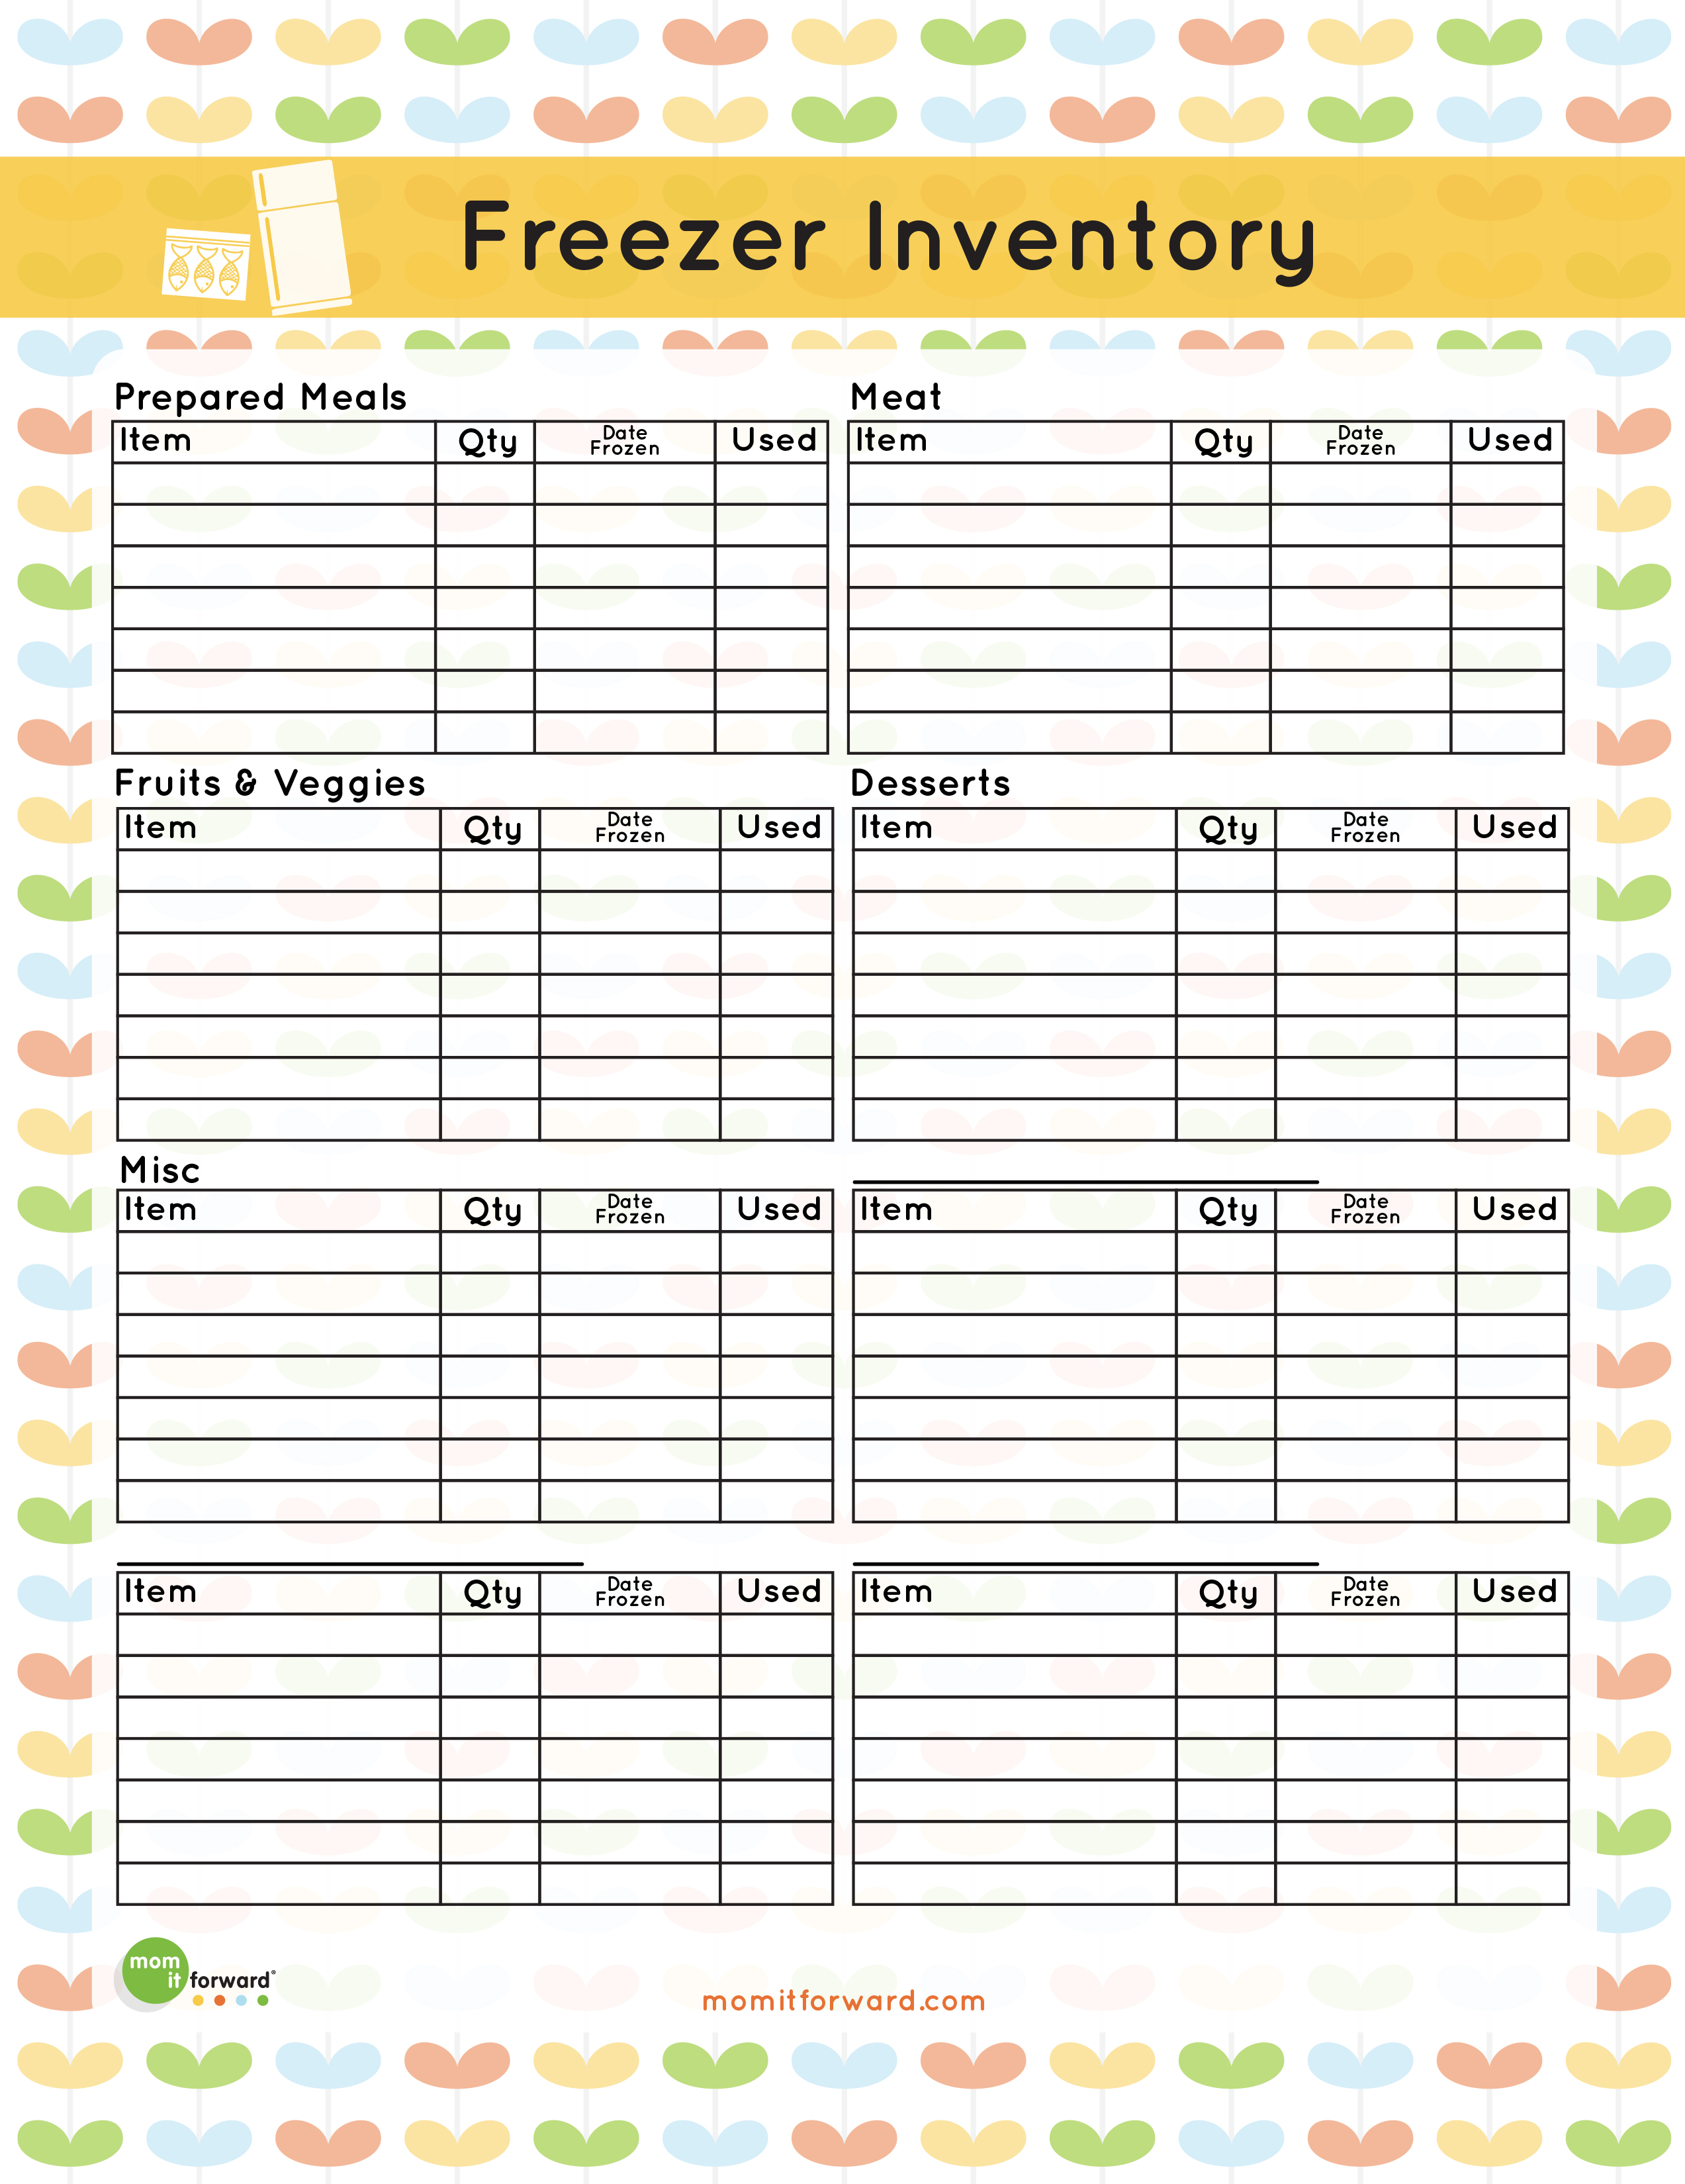 food-inventory-form-free-printable-printable-forms-free-online